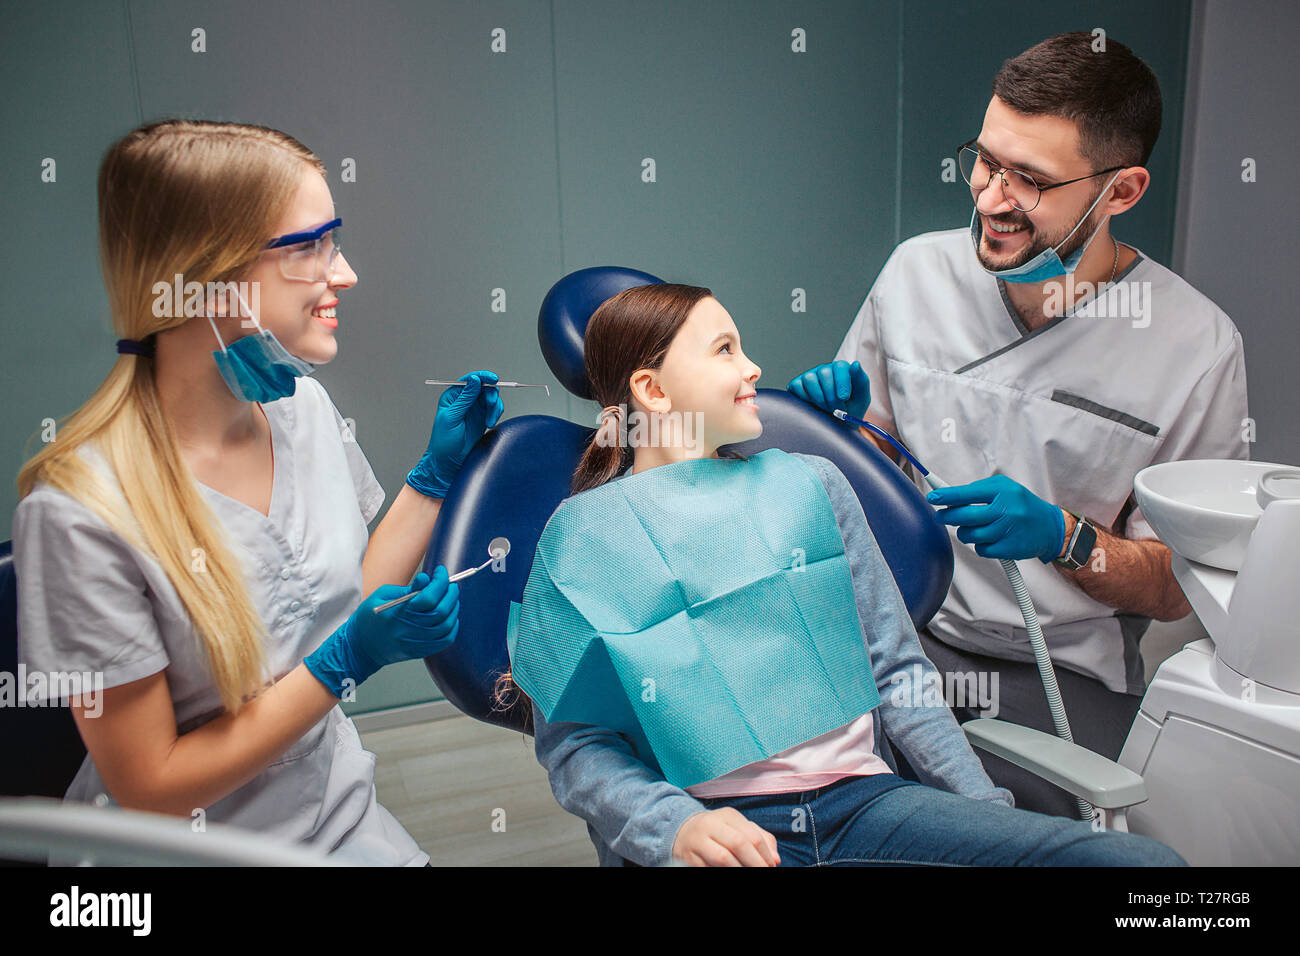 Positive happy girl sit in dental chair and look and male dentist. He smile to her. Female helper happy too. Sit in room together Stock Photo